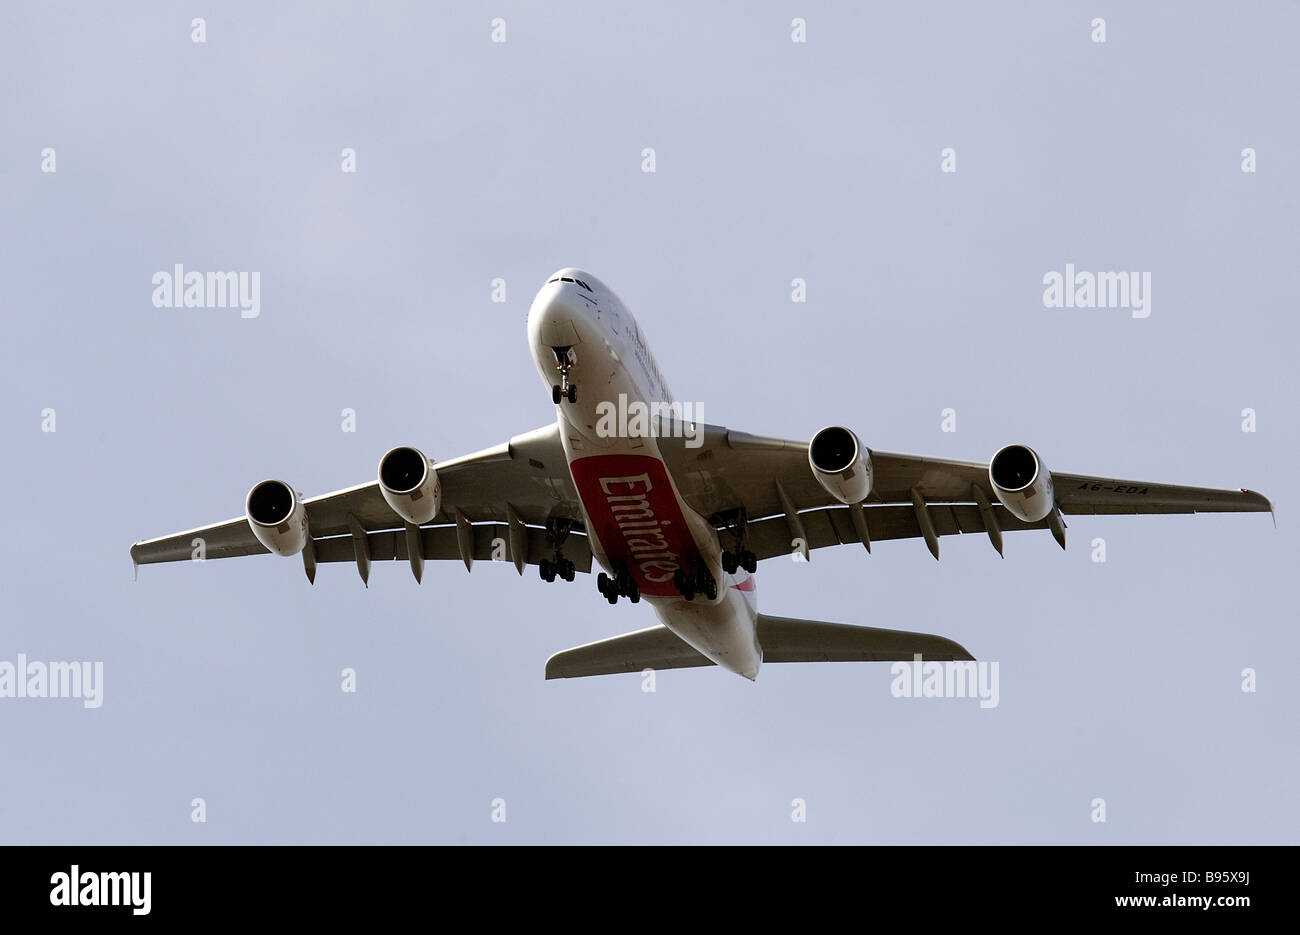 Emirates Airways new Airbus A380 long haul passenger aircraft prepares to land at London's Heathrow Airport Stock Photo